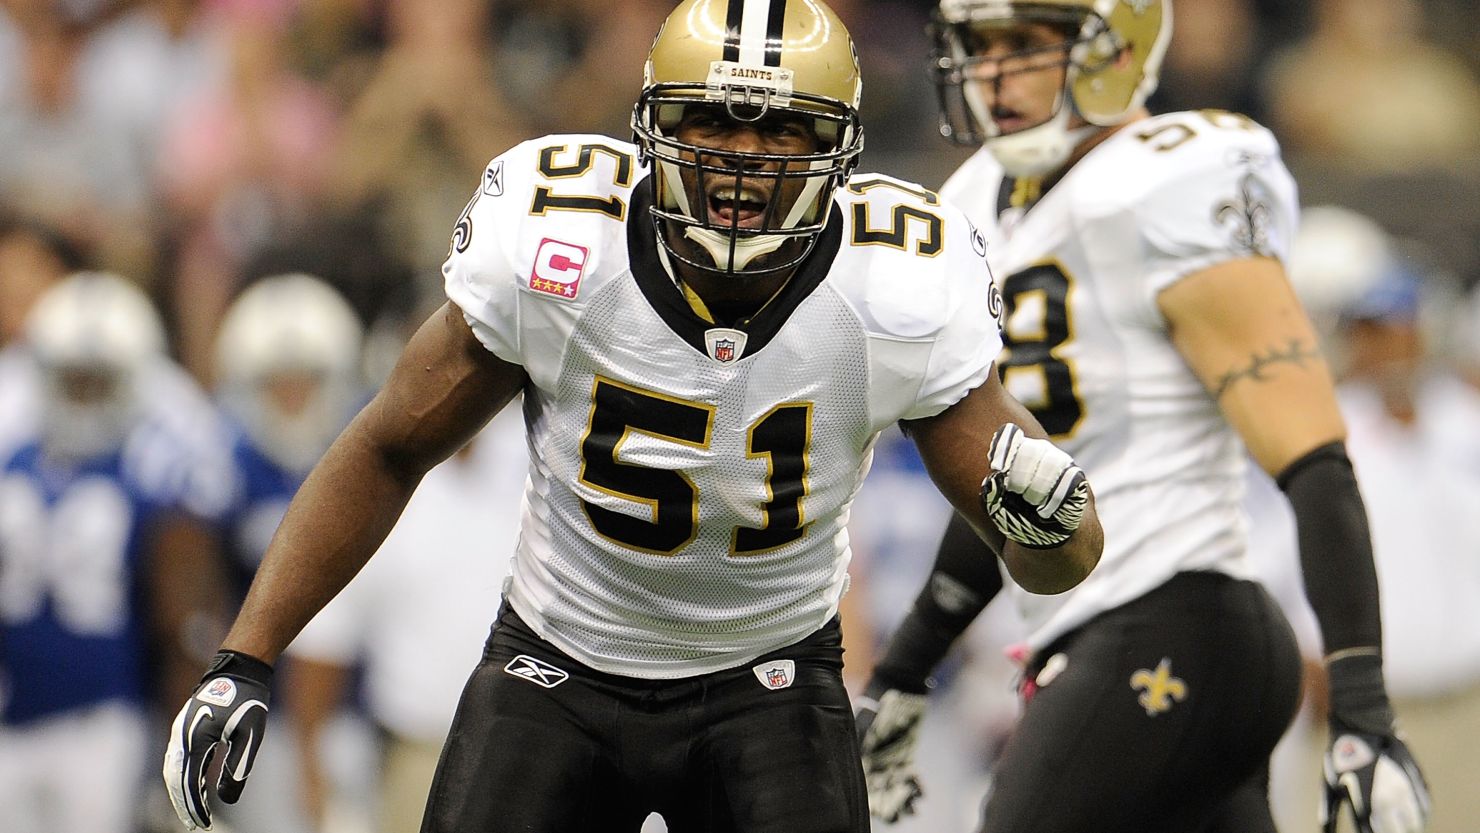 New Orleans Saints linebacker Jonathan Vilma is one of four players suspended for their roles in the "bountygate" scandal.